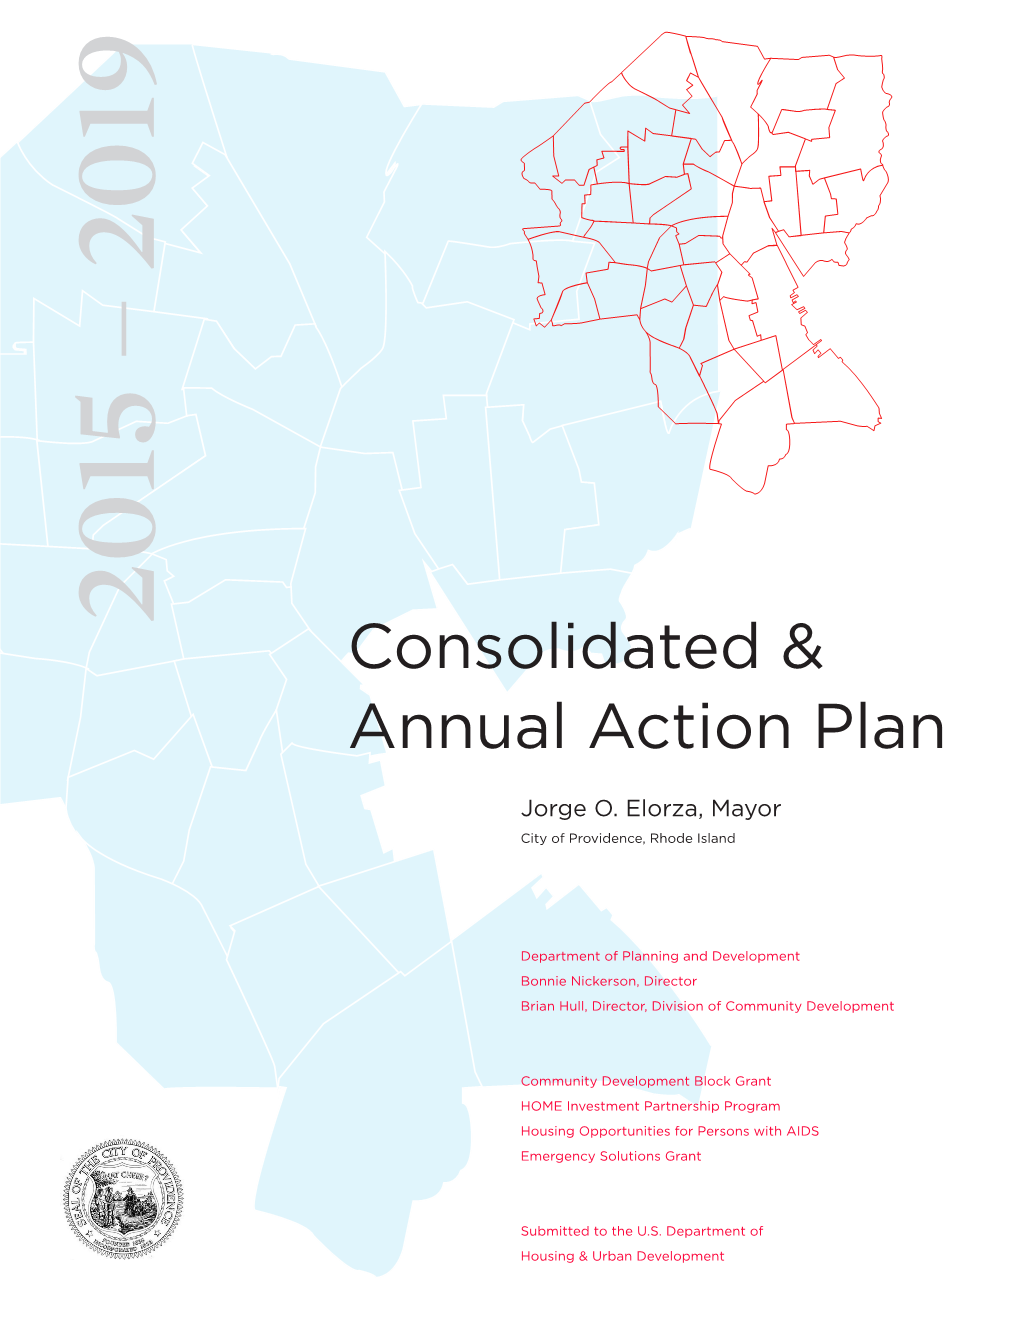 Consolidated & Annual Action Plan